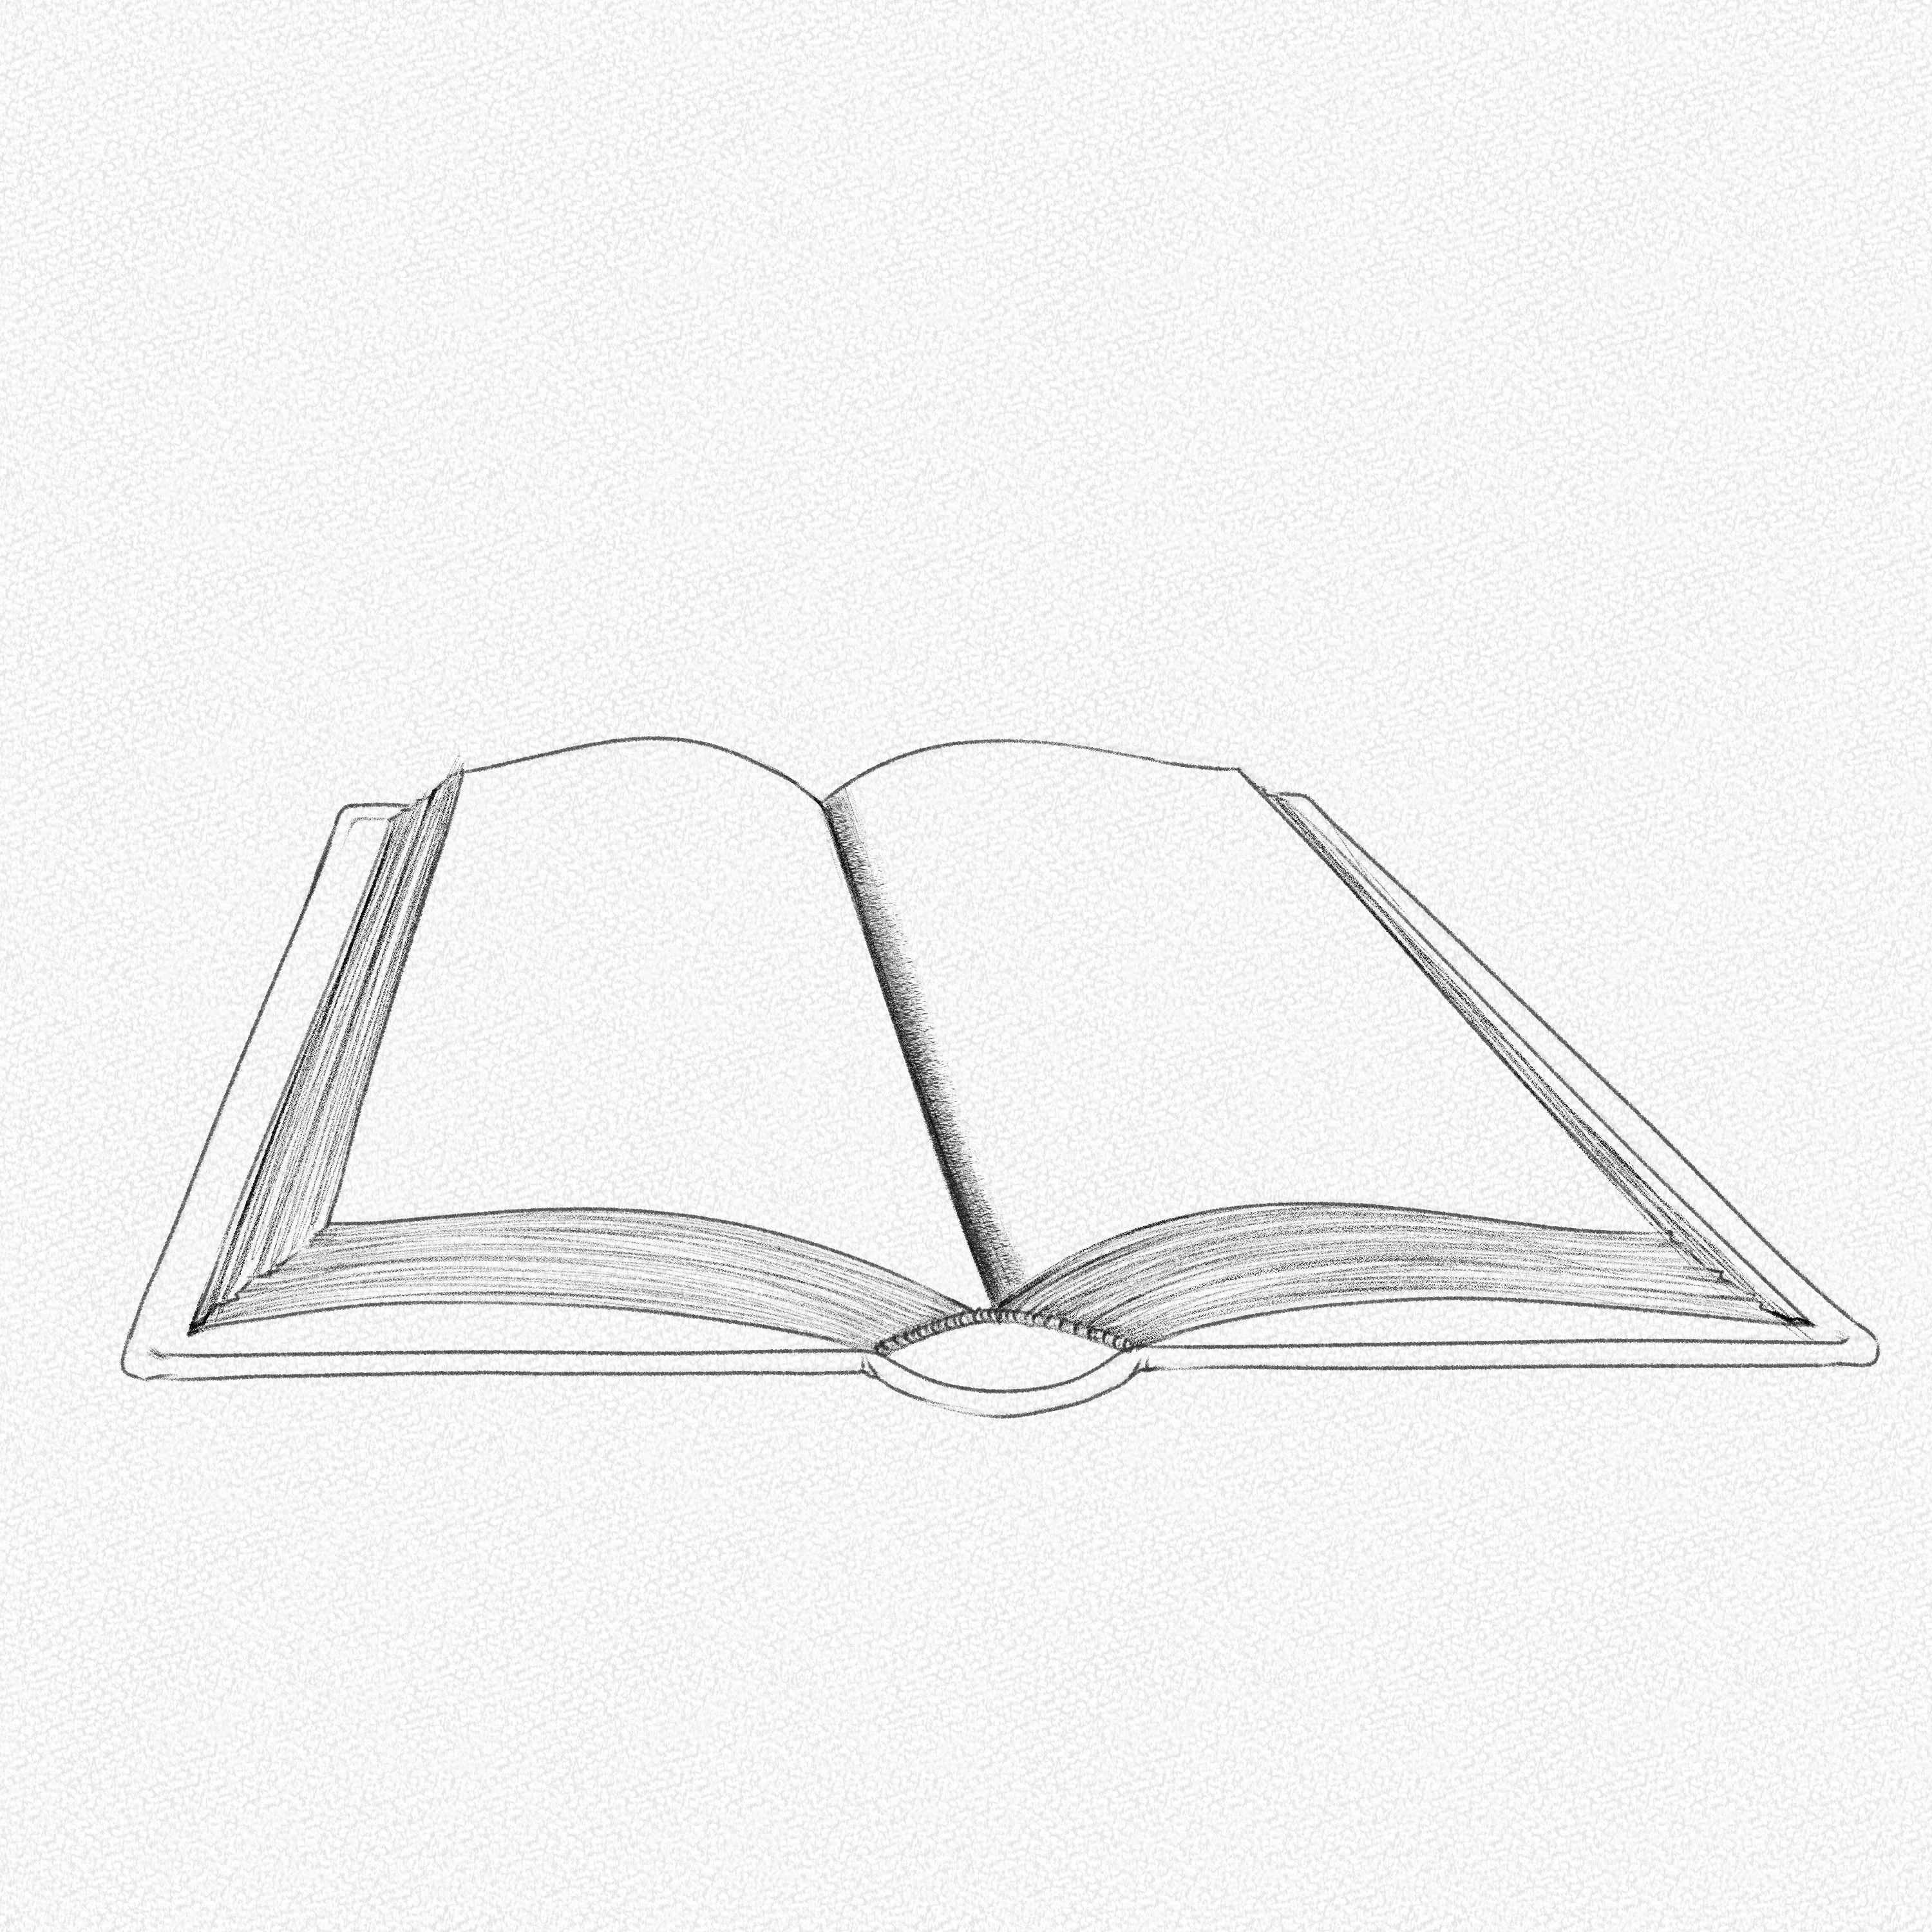 How to draw a Open Book Step by Step